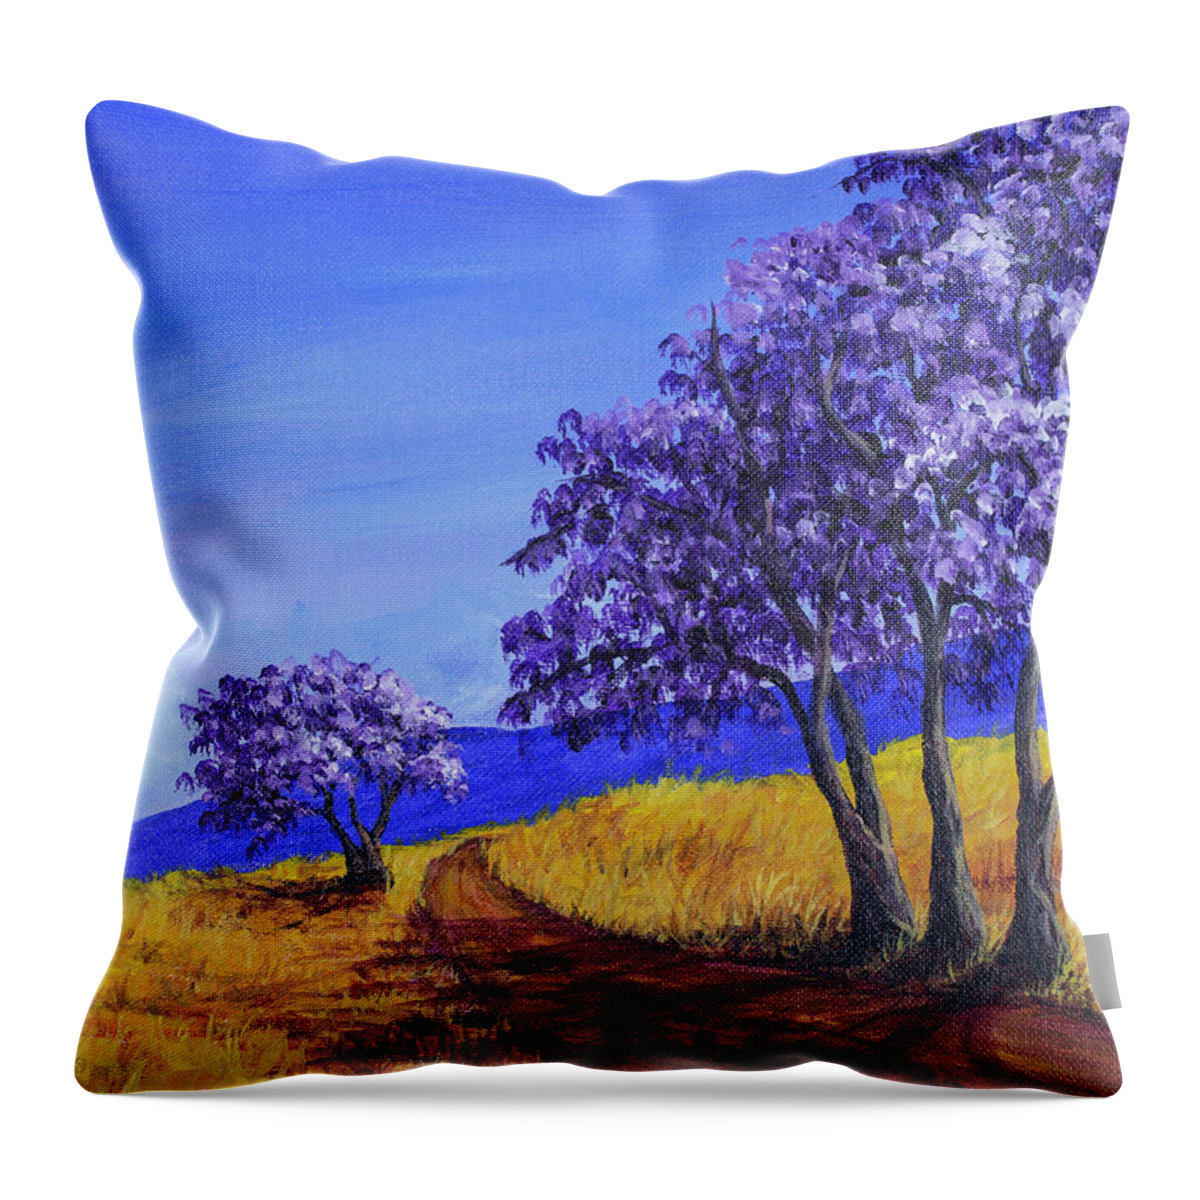 Landscape Throw Pillow featuring the painting Jacaranda Trees Maui by Darice Machel McGuire